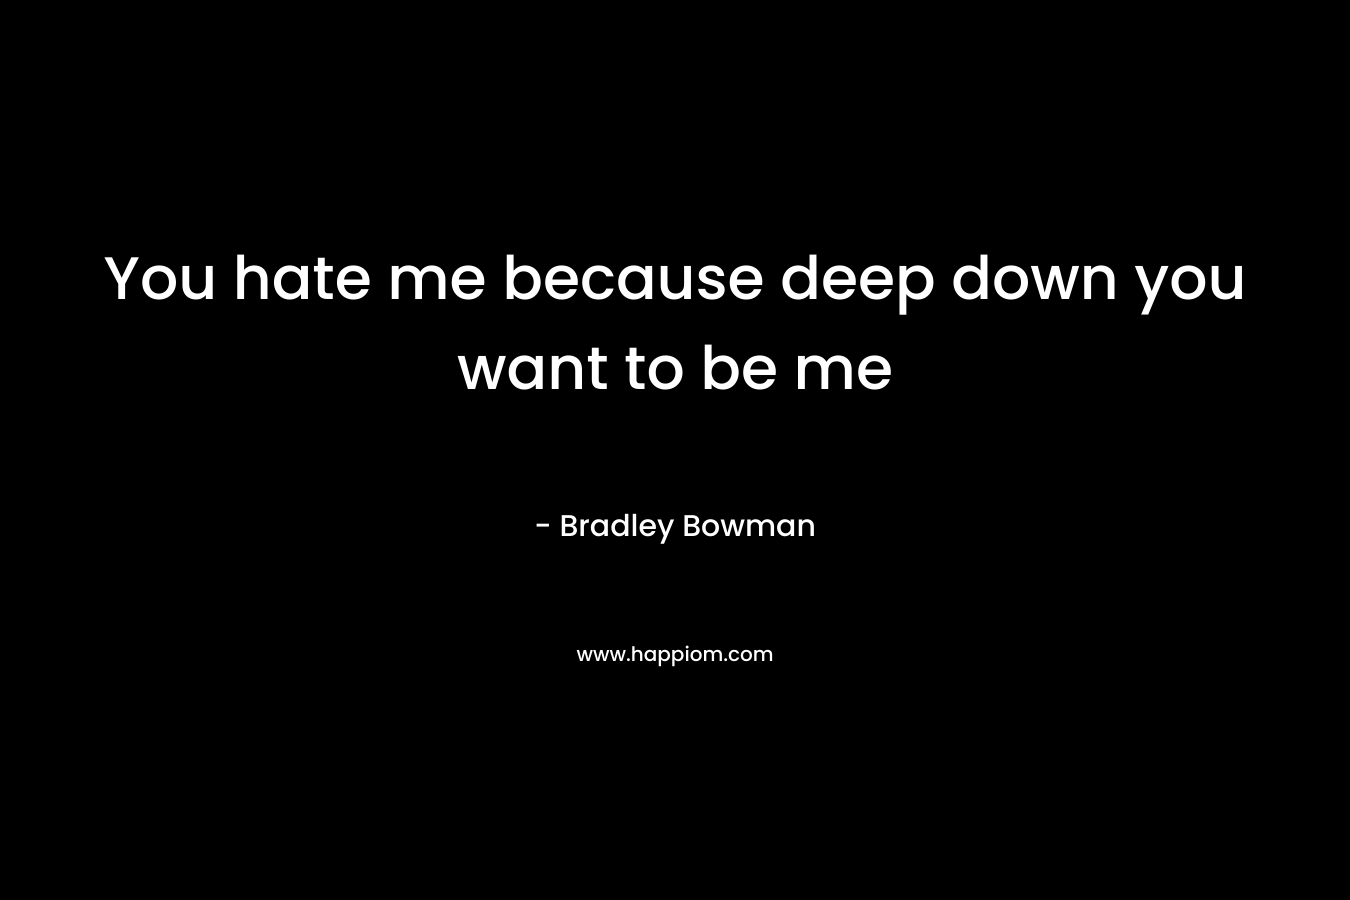 You hate me because deep down you want to be me